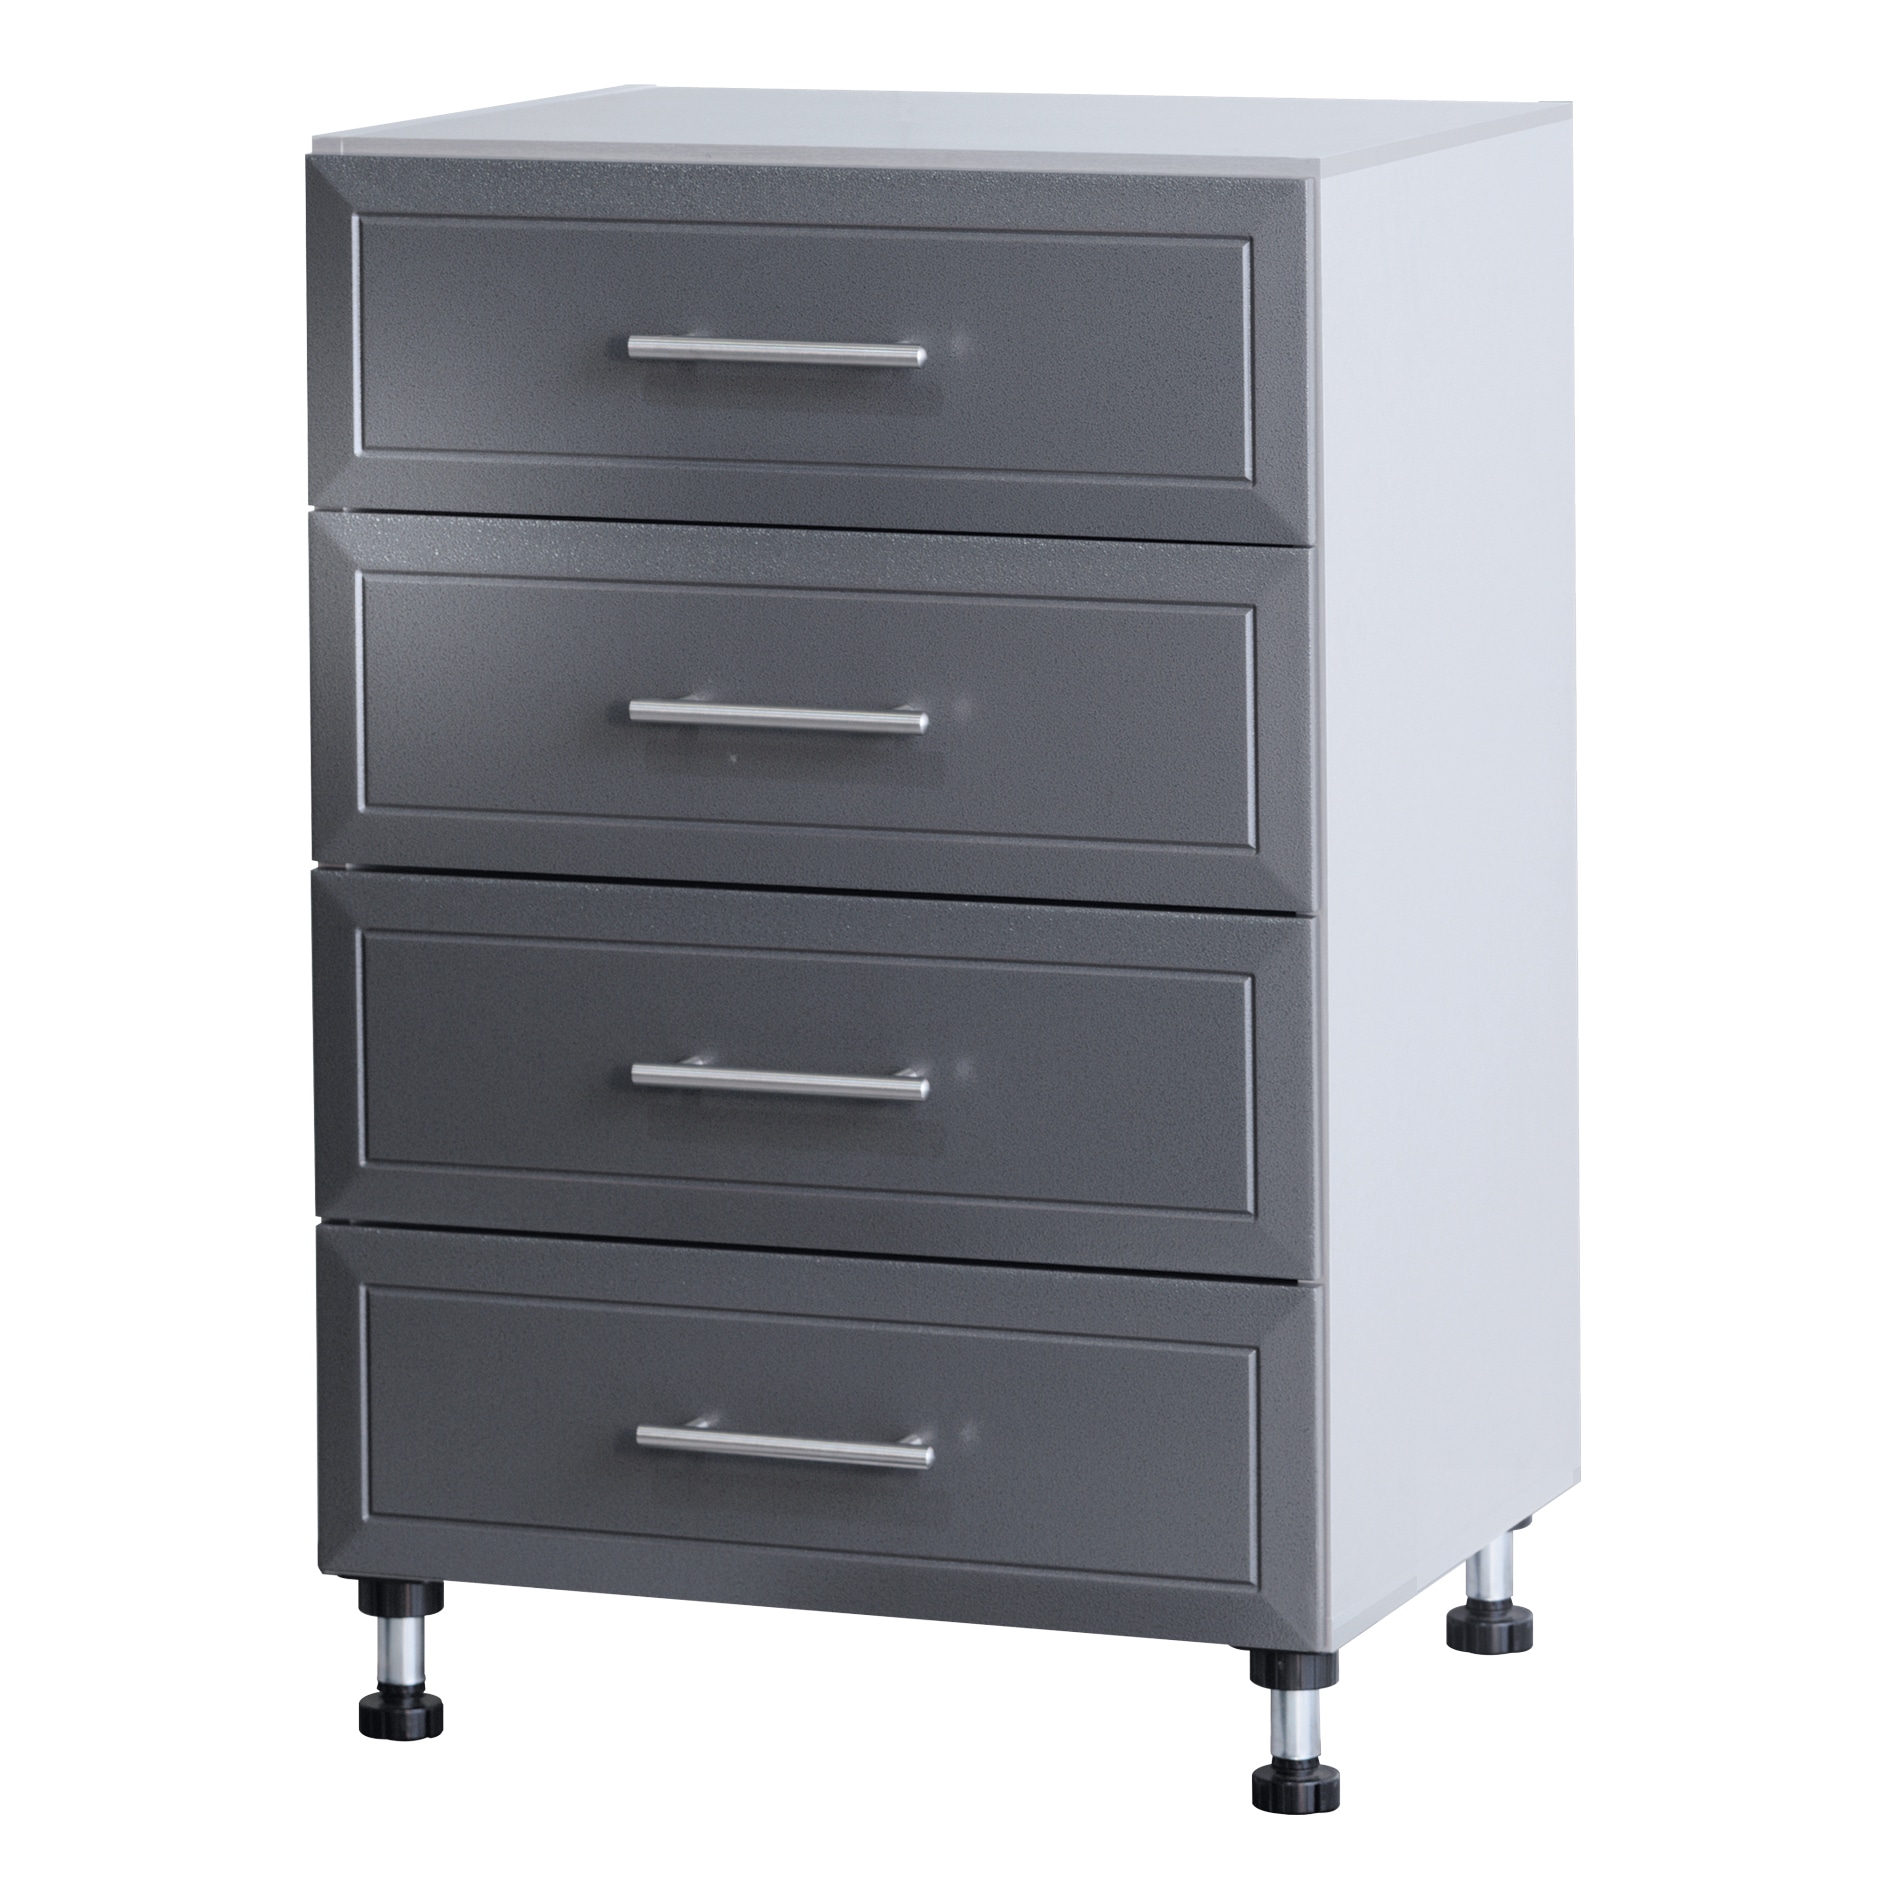 ClosetMaid ProGarage 4 Drawer Cabinet Free Shipping Today